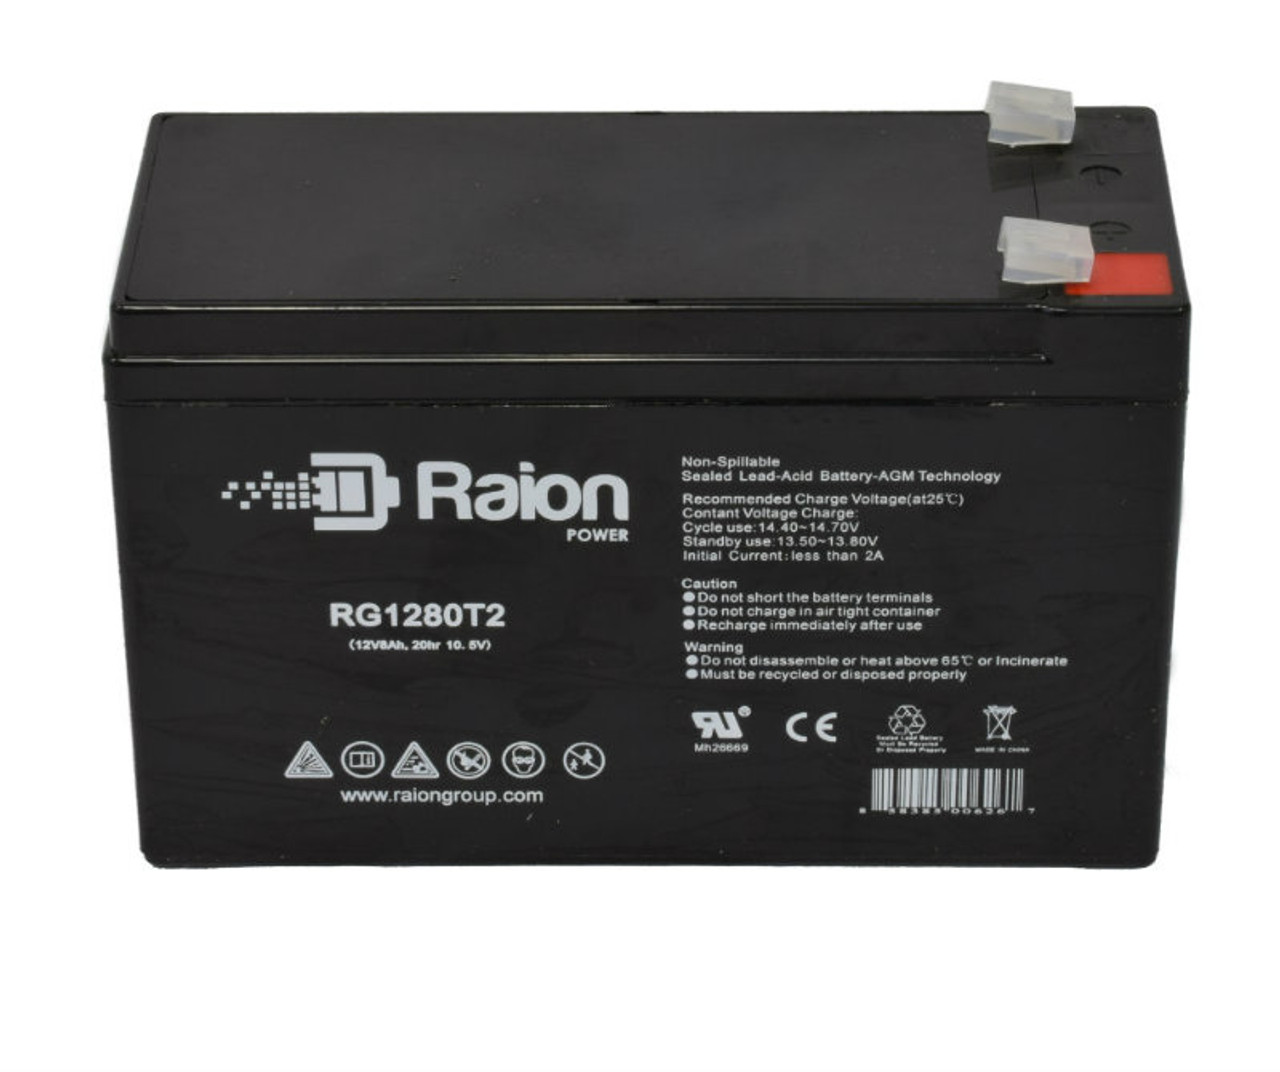 Raion Power Replacement 12V 8Ah Battery for Sscor 10002 Portable Suction Unit - 1 Pack